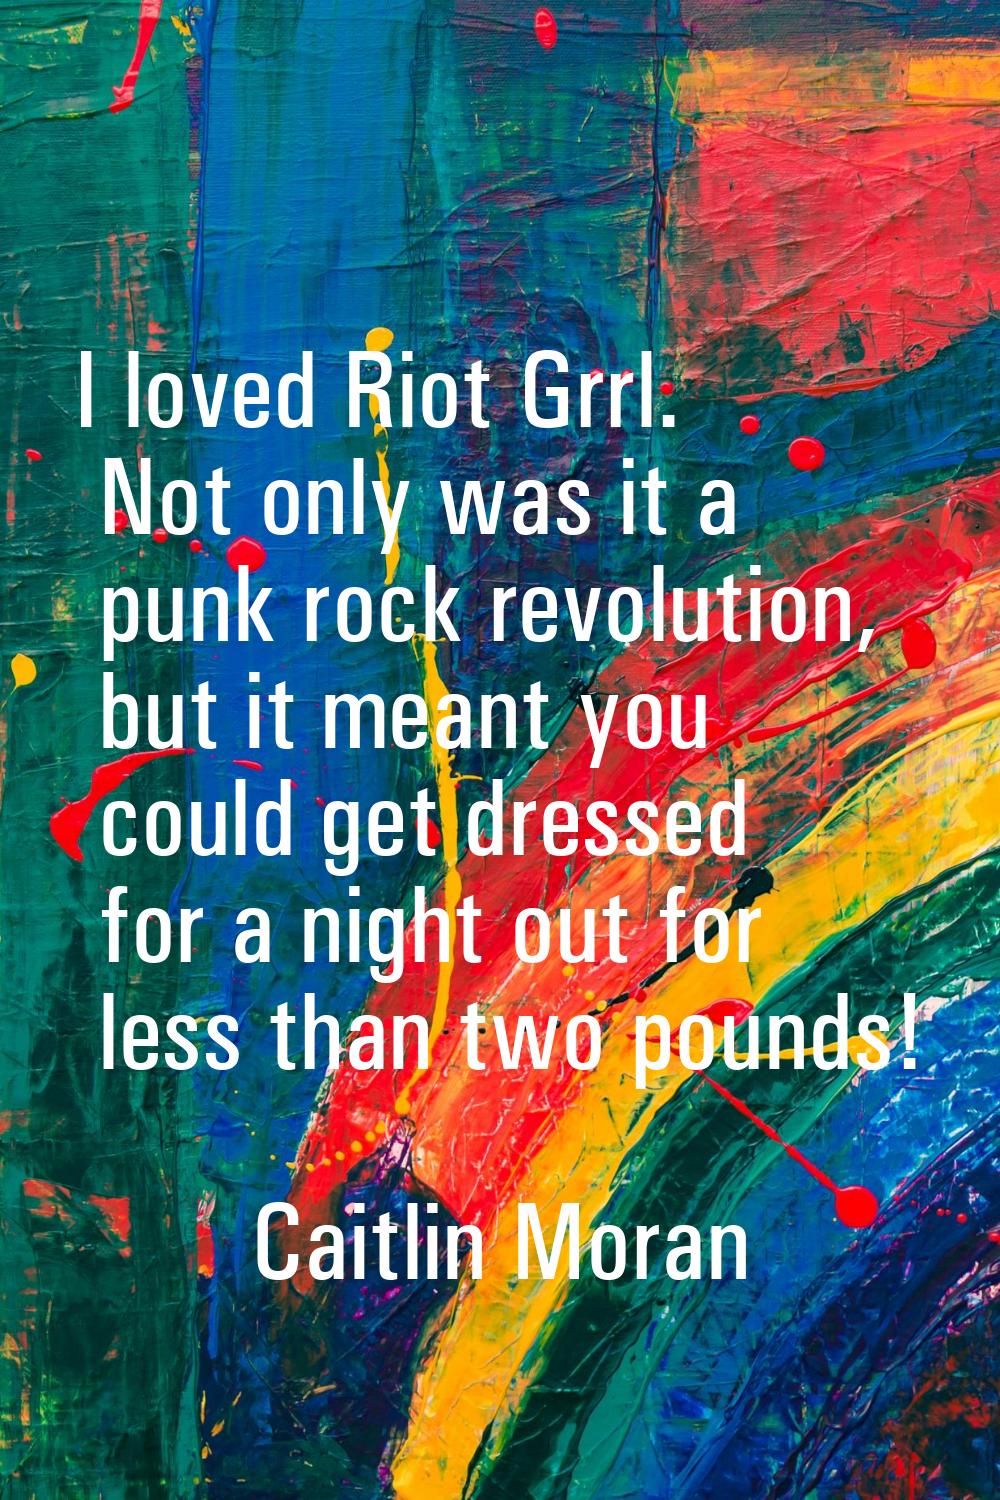 I loved Riot Grrl. Not only was it a punk rock revolution, but it meant you could get dressed for a